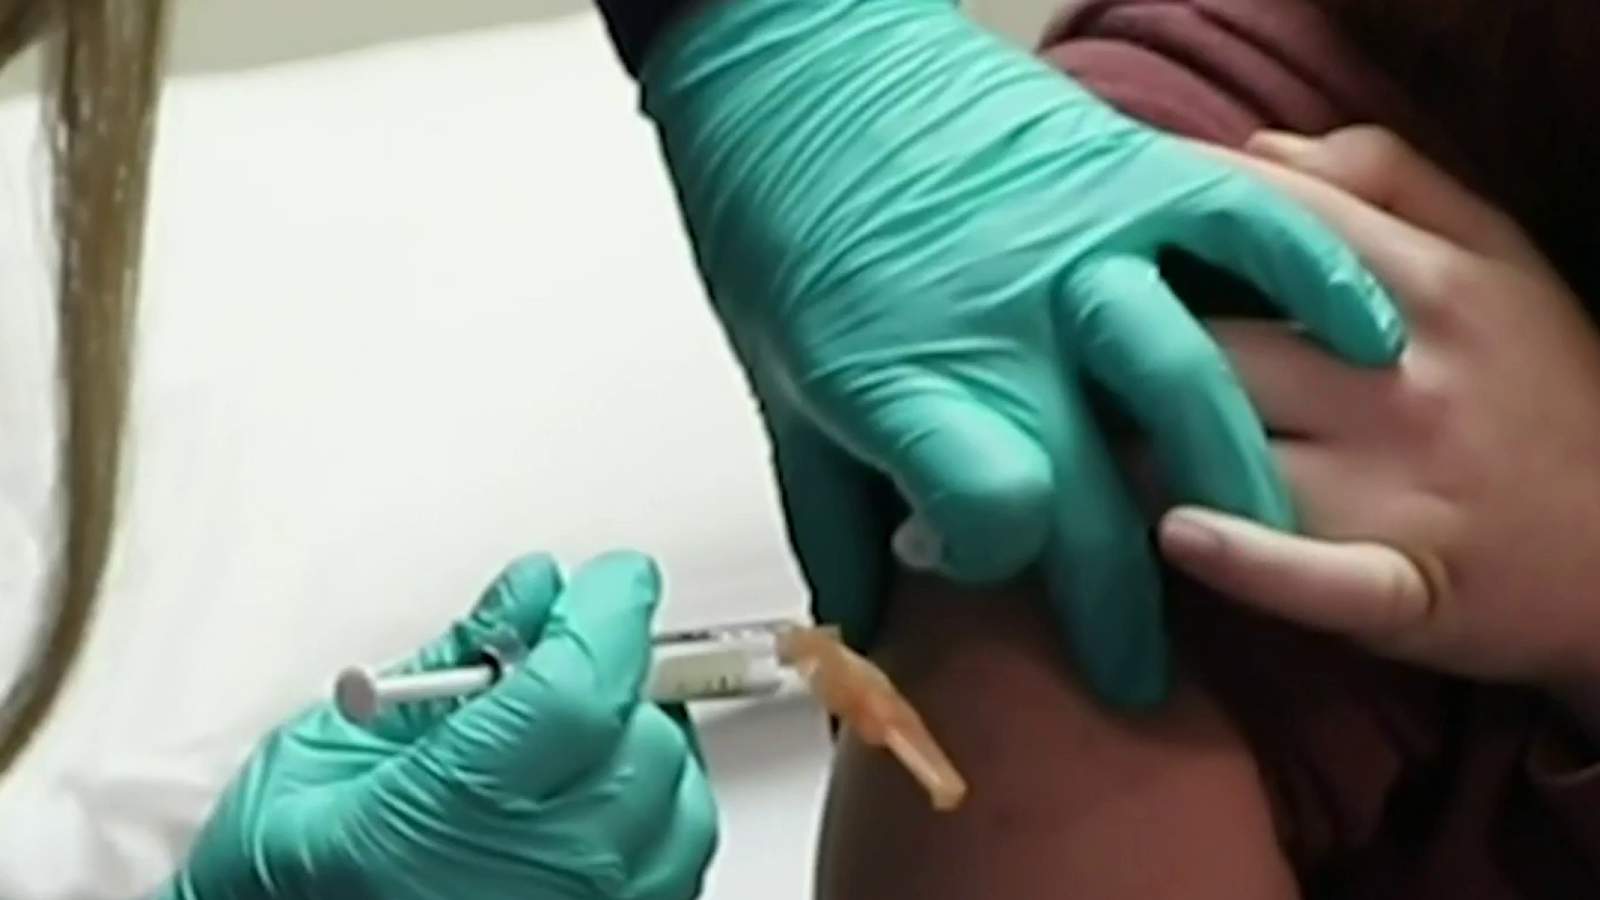 Michigan health officials to work with community leaders to address vaccine concerns